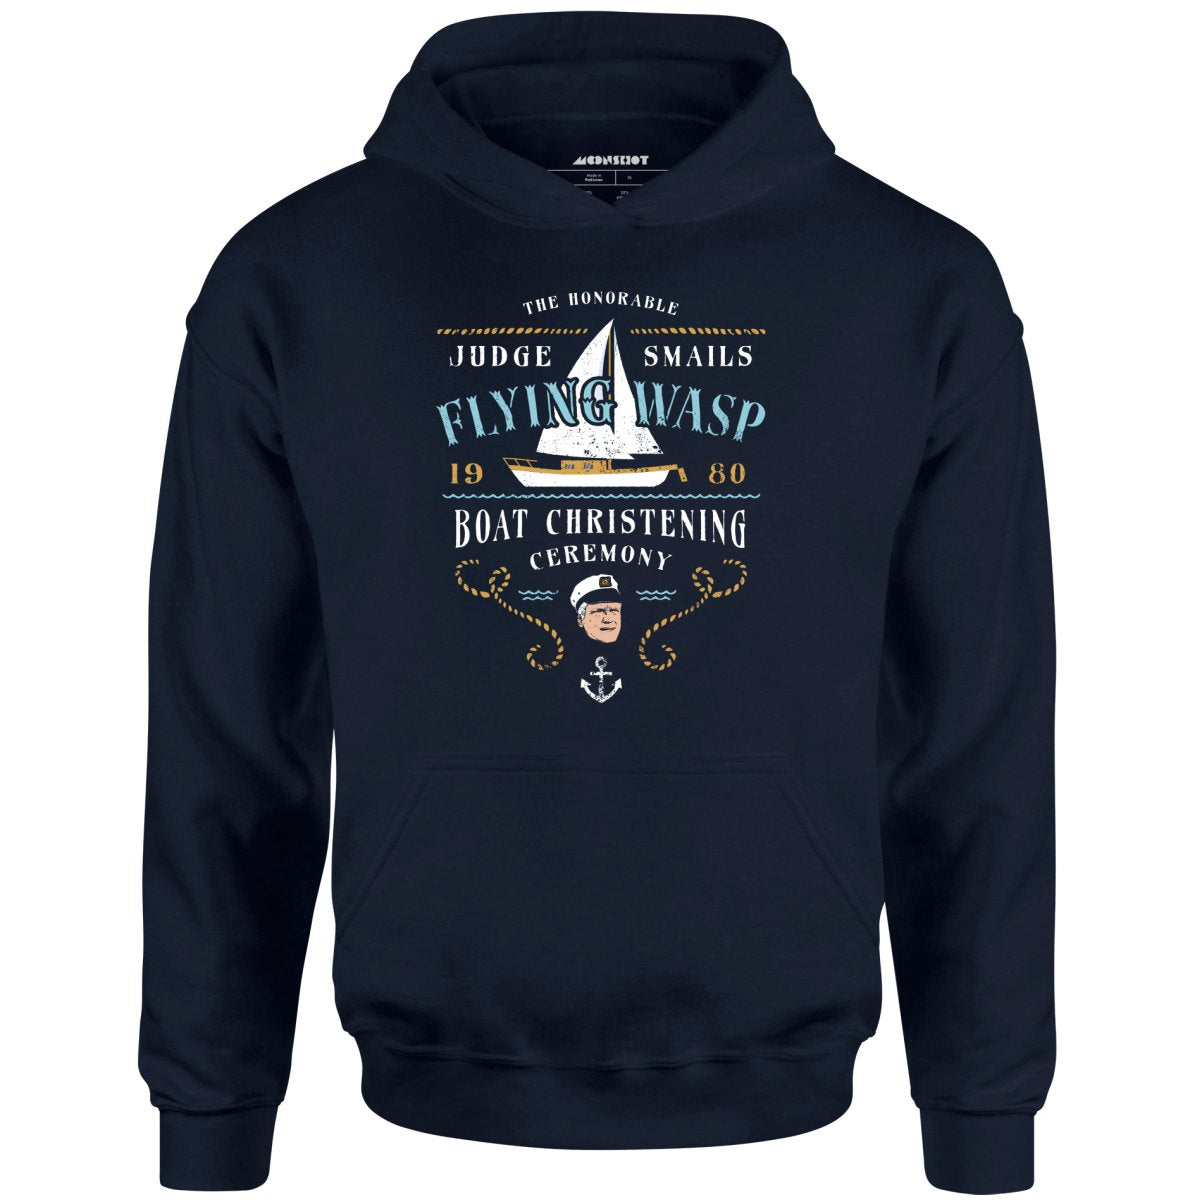 Judge Smails - Flying Wasp Boat Christening Ceremony - Unisex Hoodie